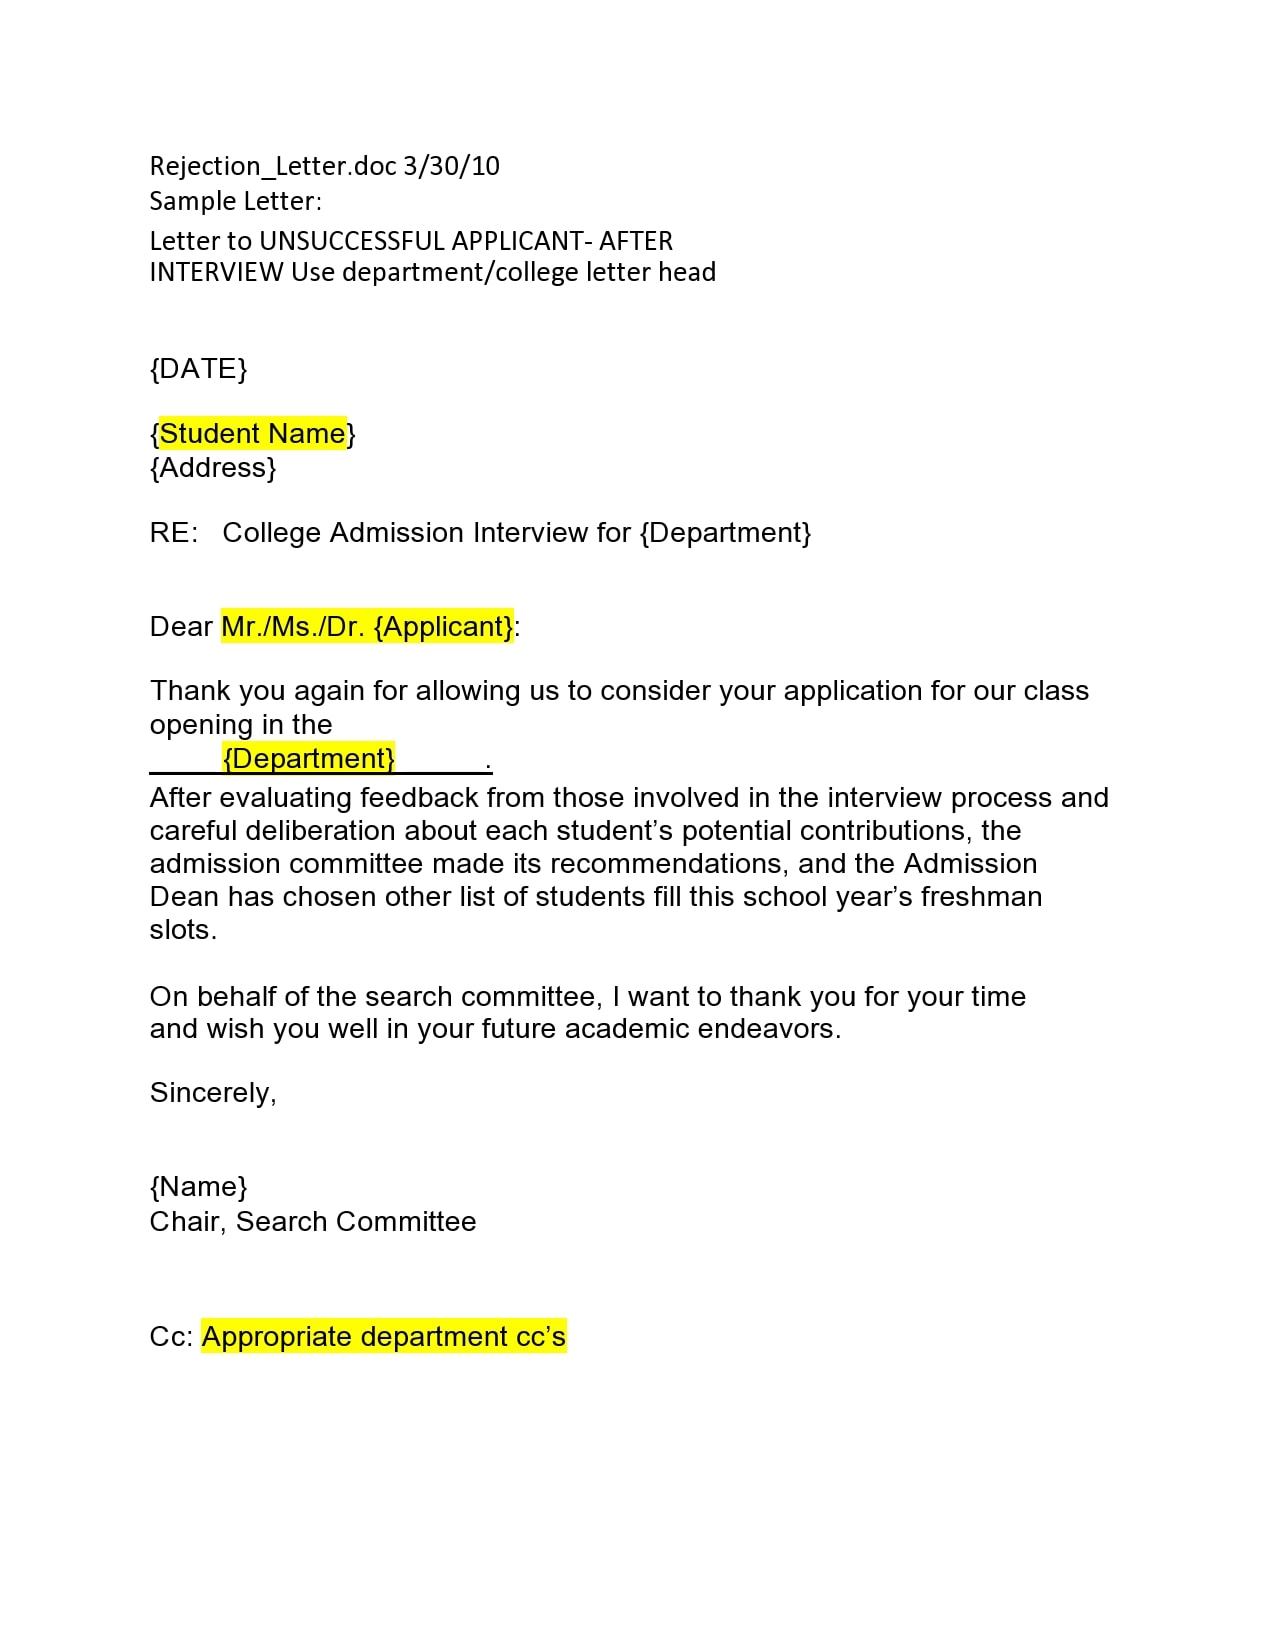 download-39-unsuccessful-applicants-sample-rejection-letter-for-job